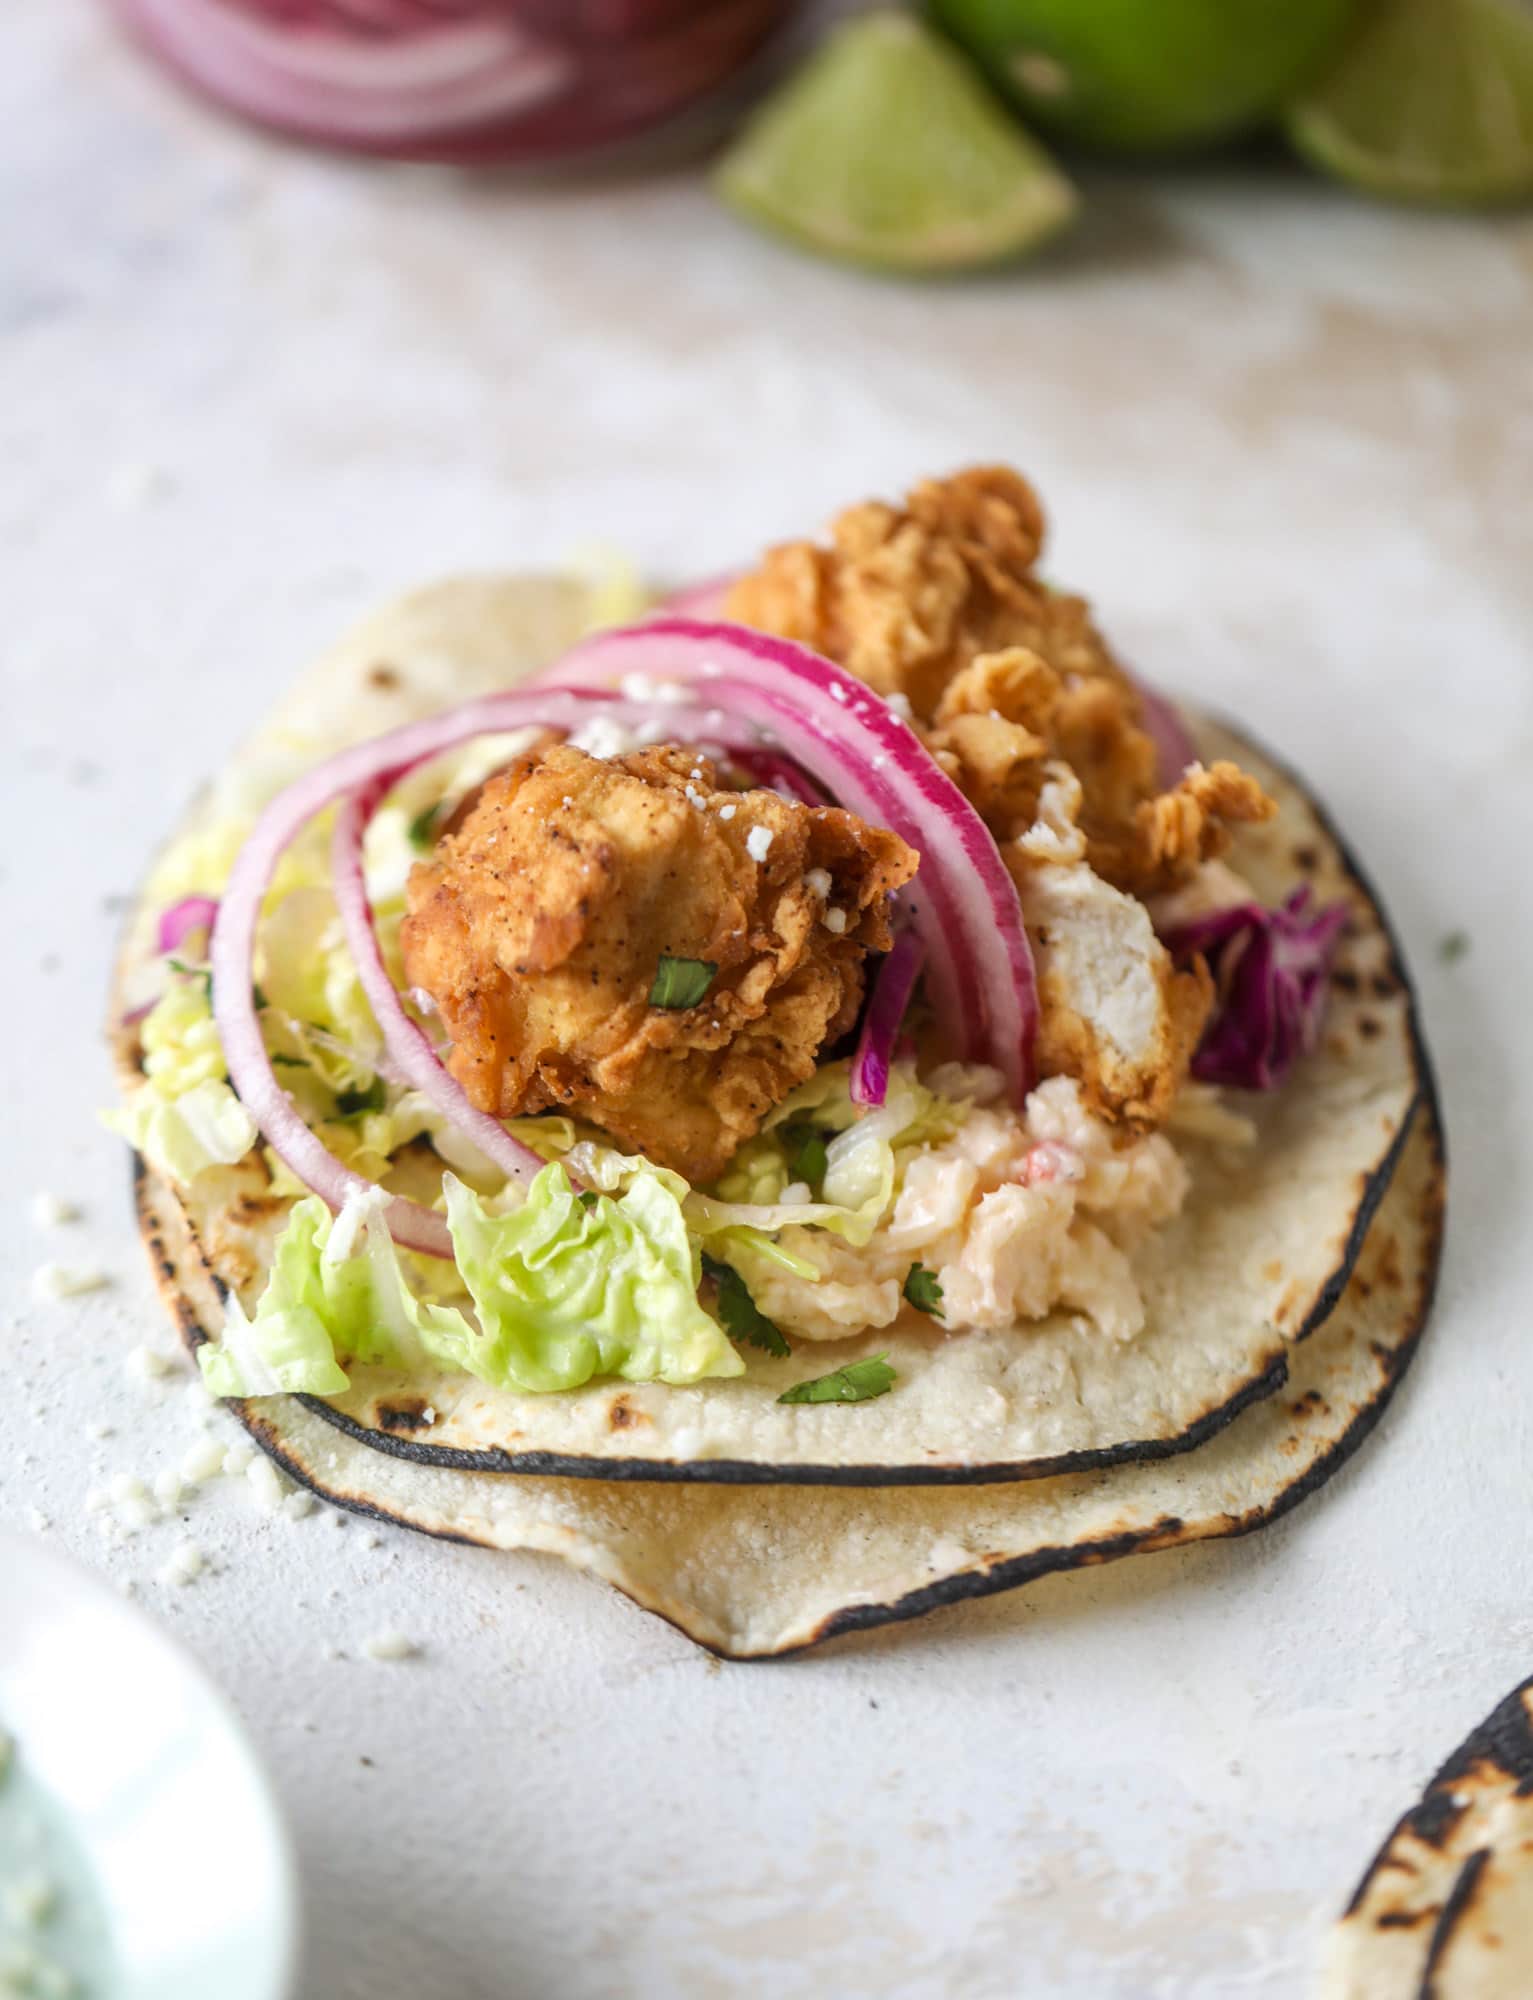 Taking crispy chicken tacos to the next level by wrapping them in a warm tortilla with gouda pimento cheese, lime cabbage and pickled onions!